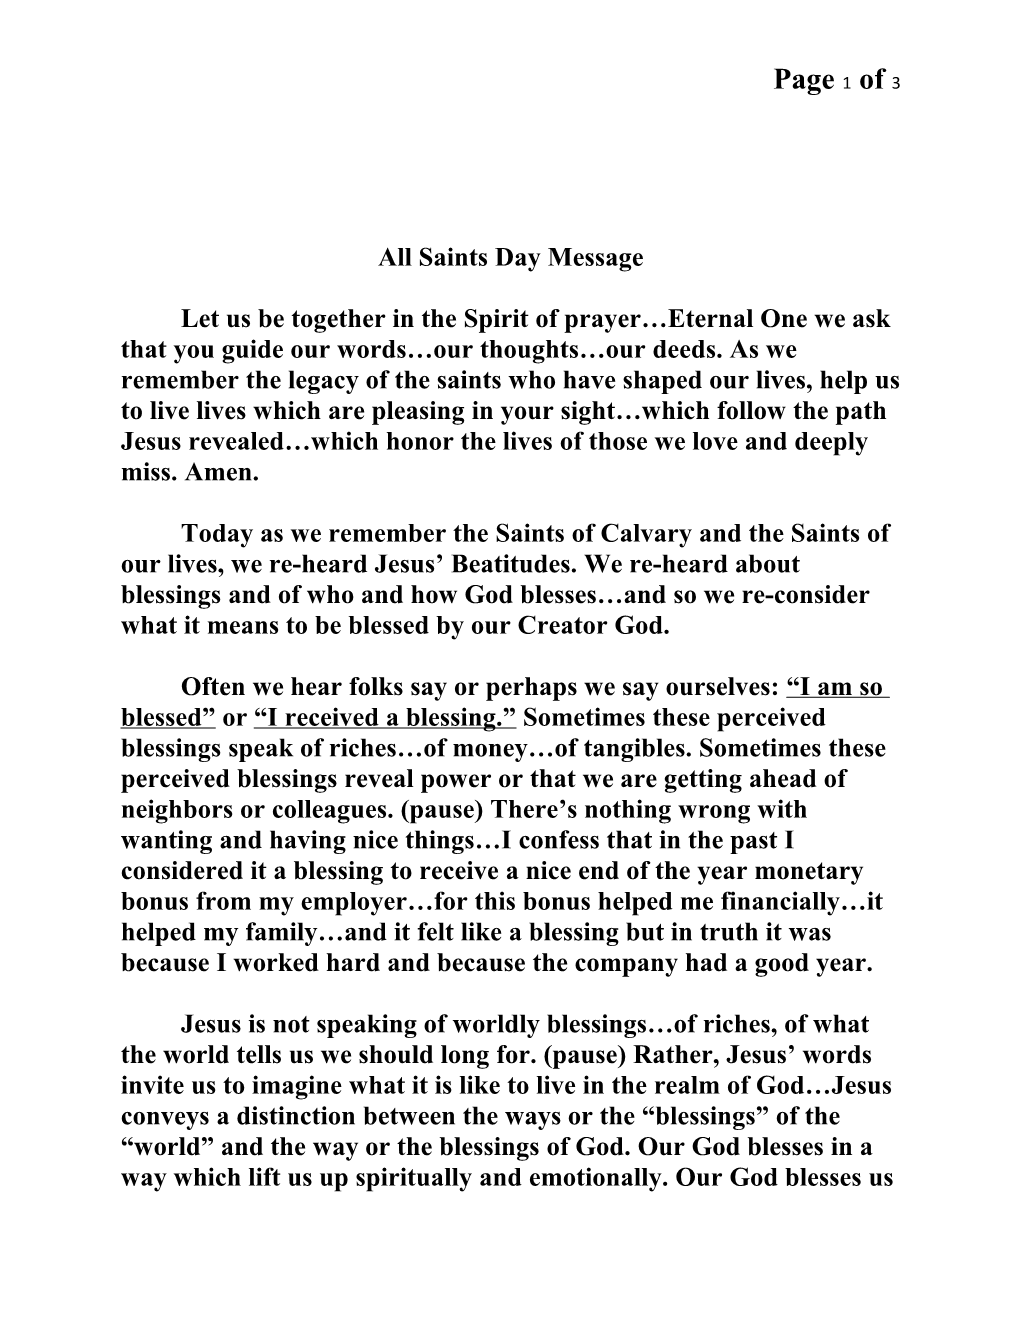 All Saints Day Message